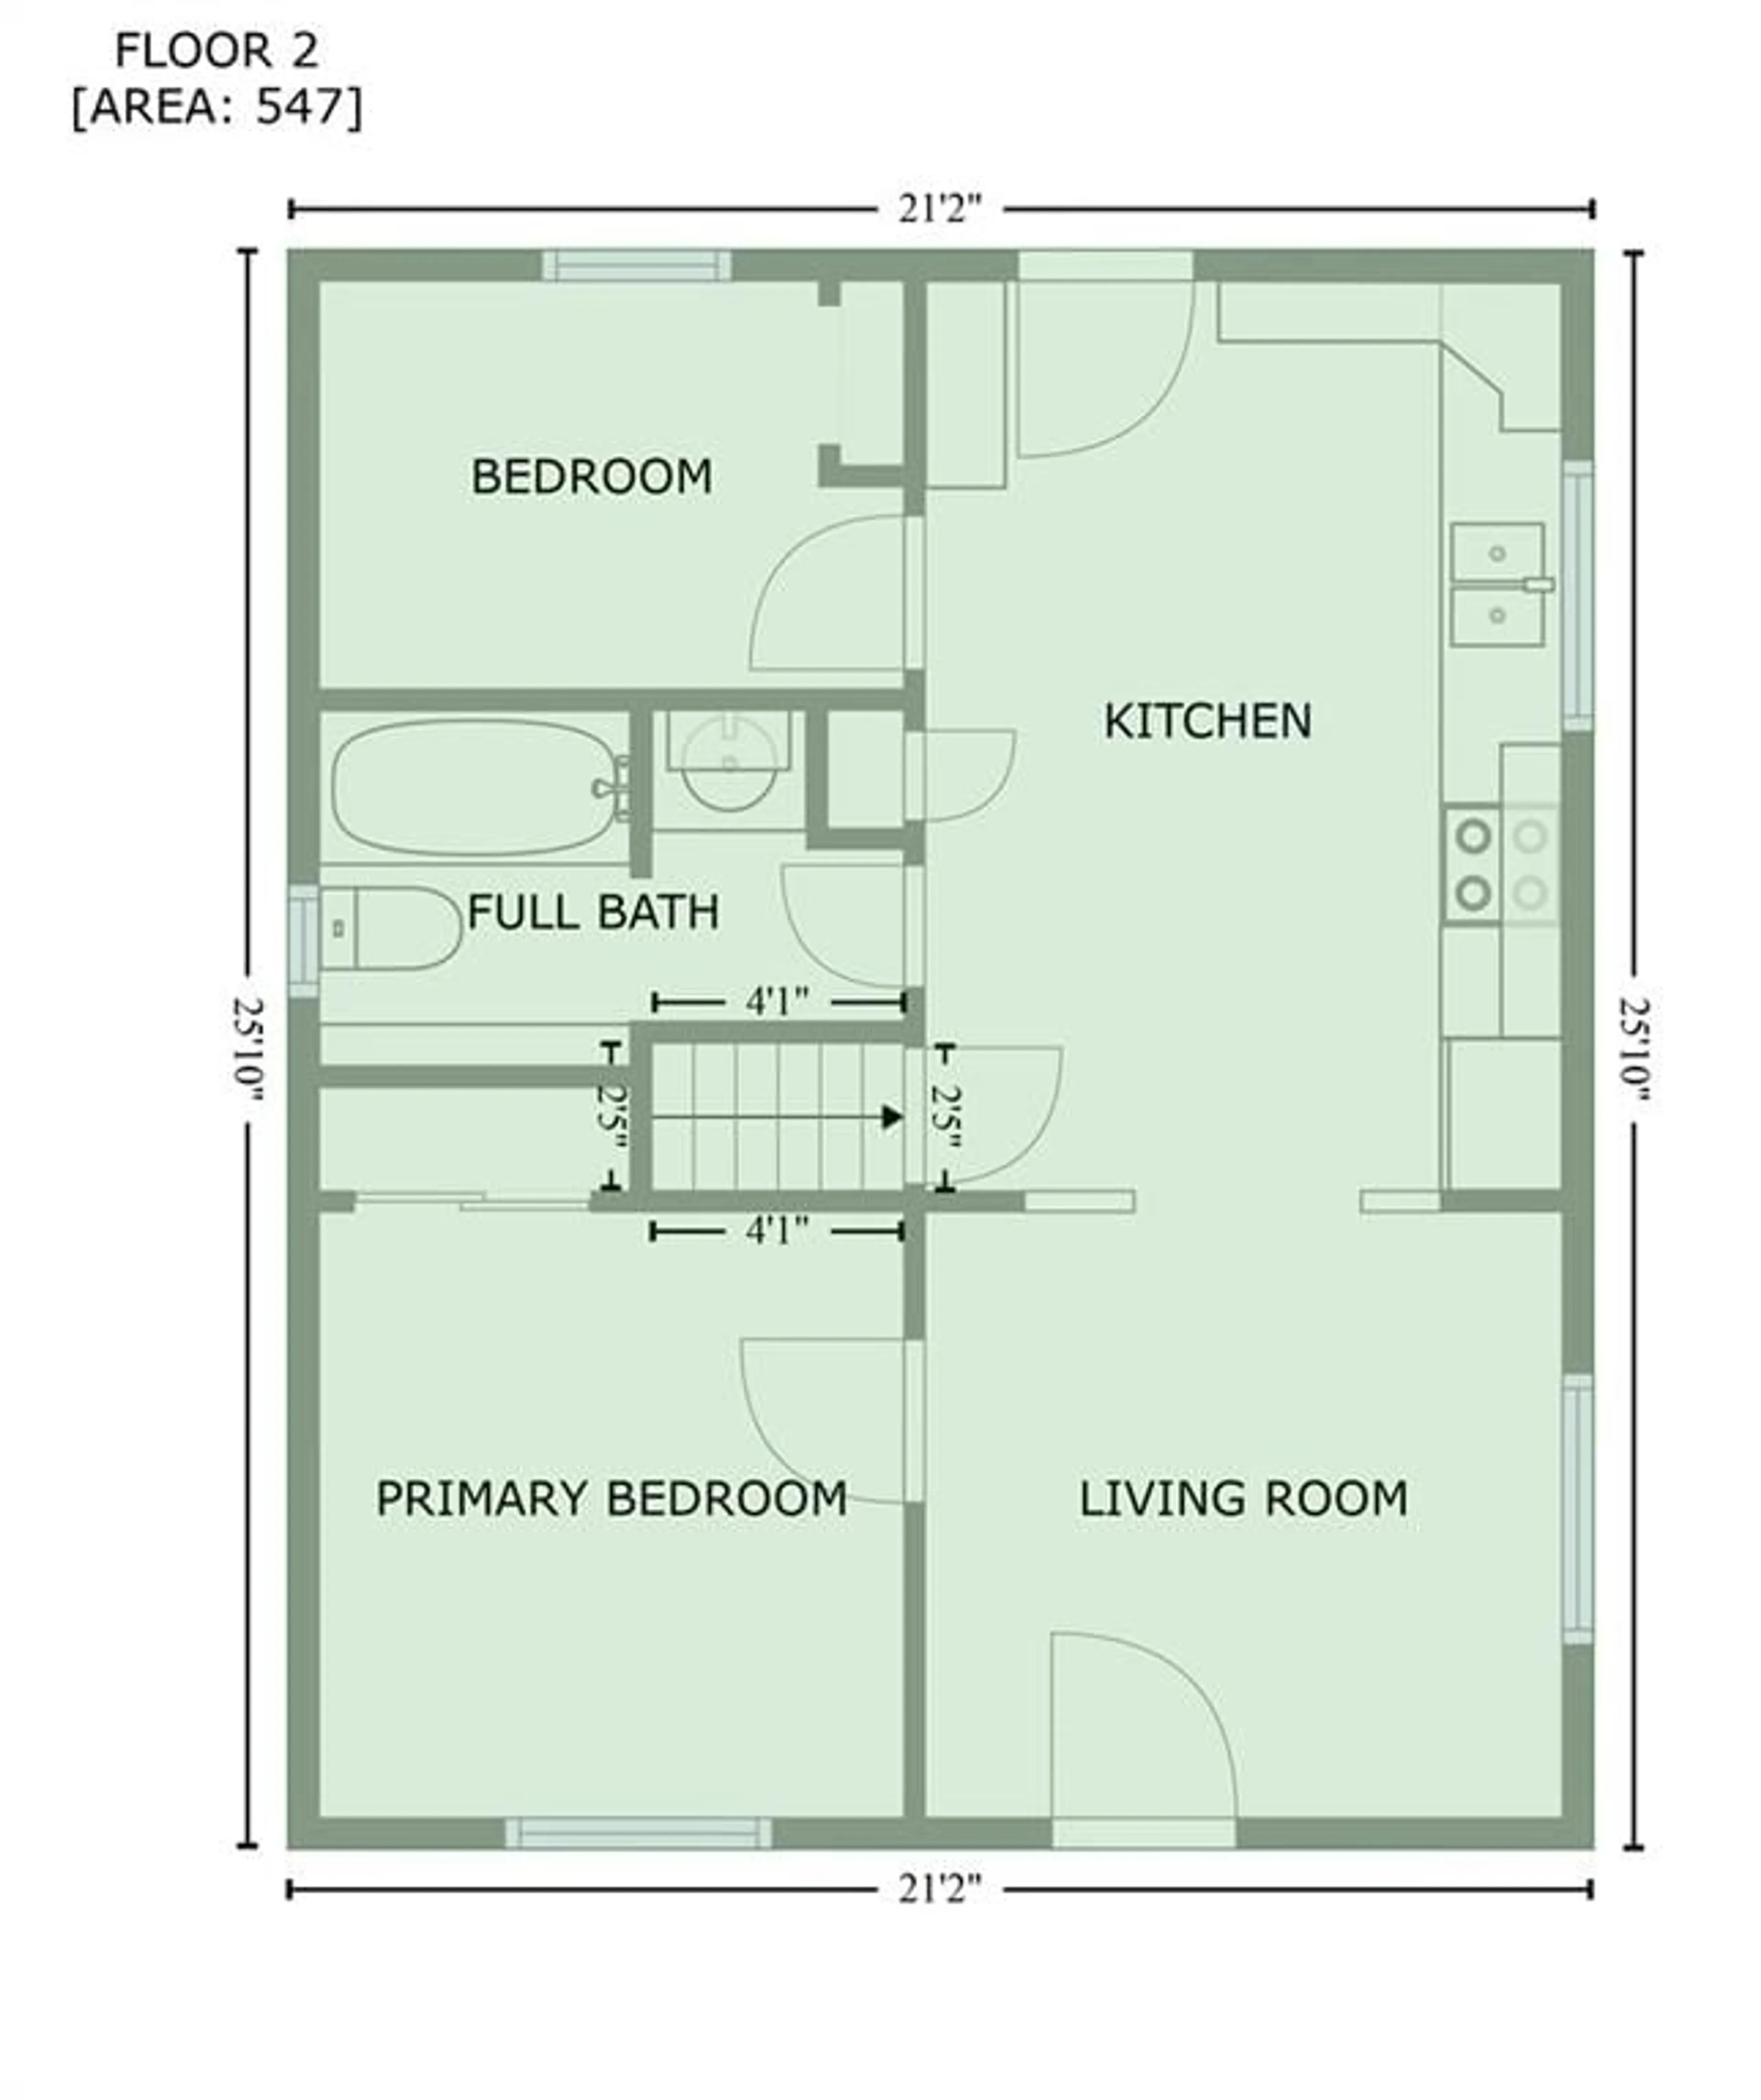 Floor plan for 325 ELEVENTH St, Cornwall Ontario K6H 2Y6